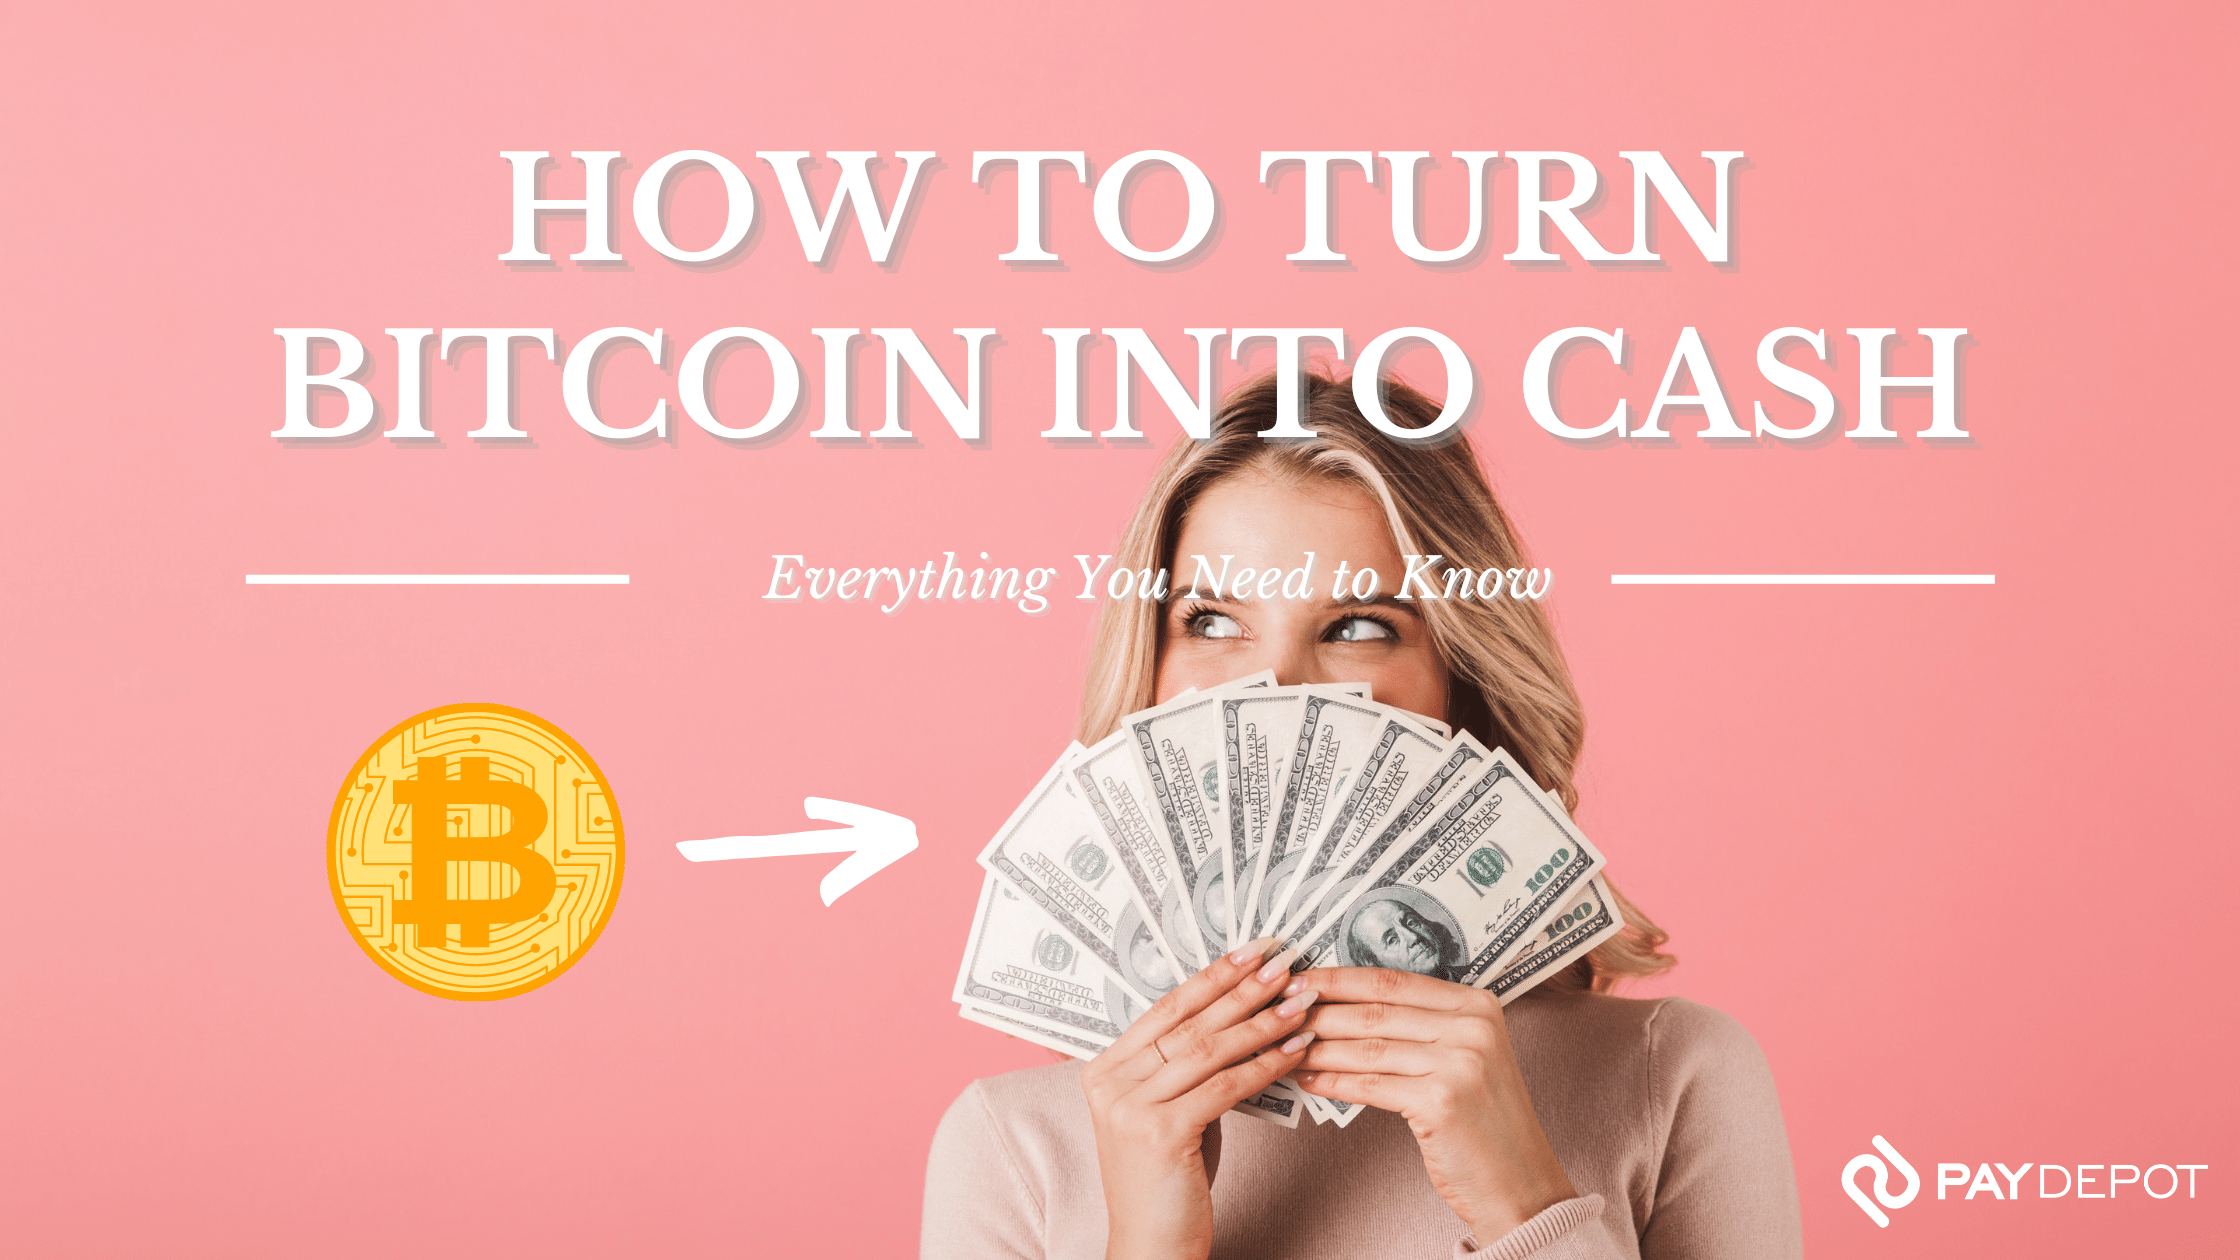 8 ways to cash out your Bitcoin | Money Under 30